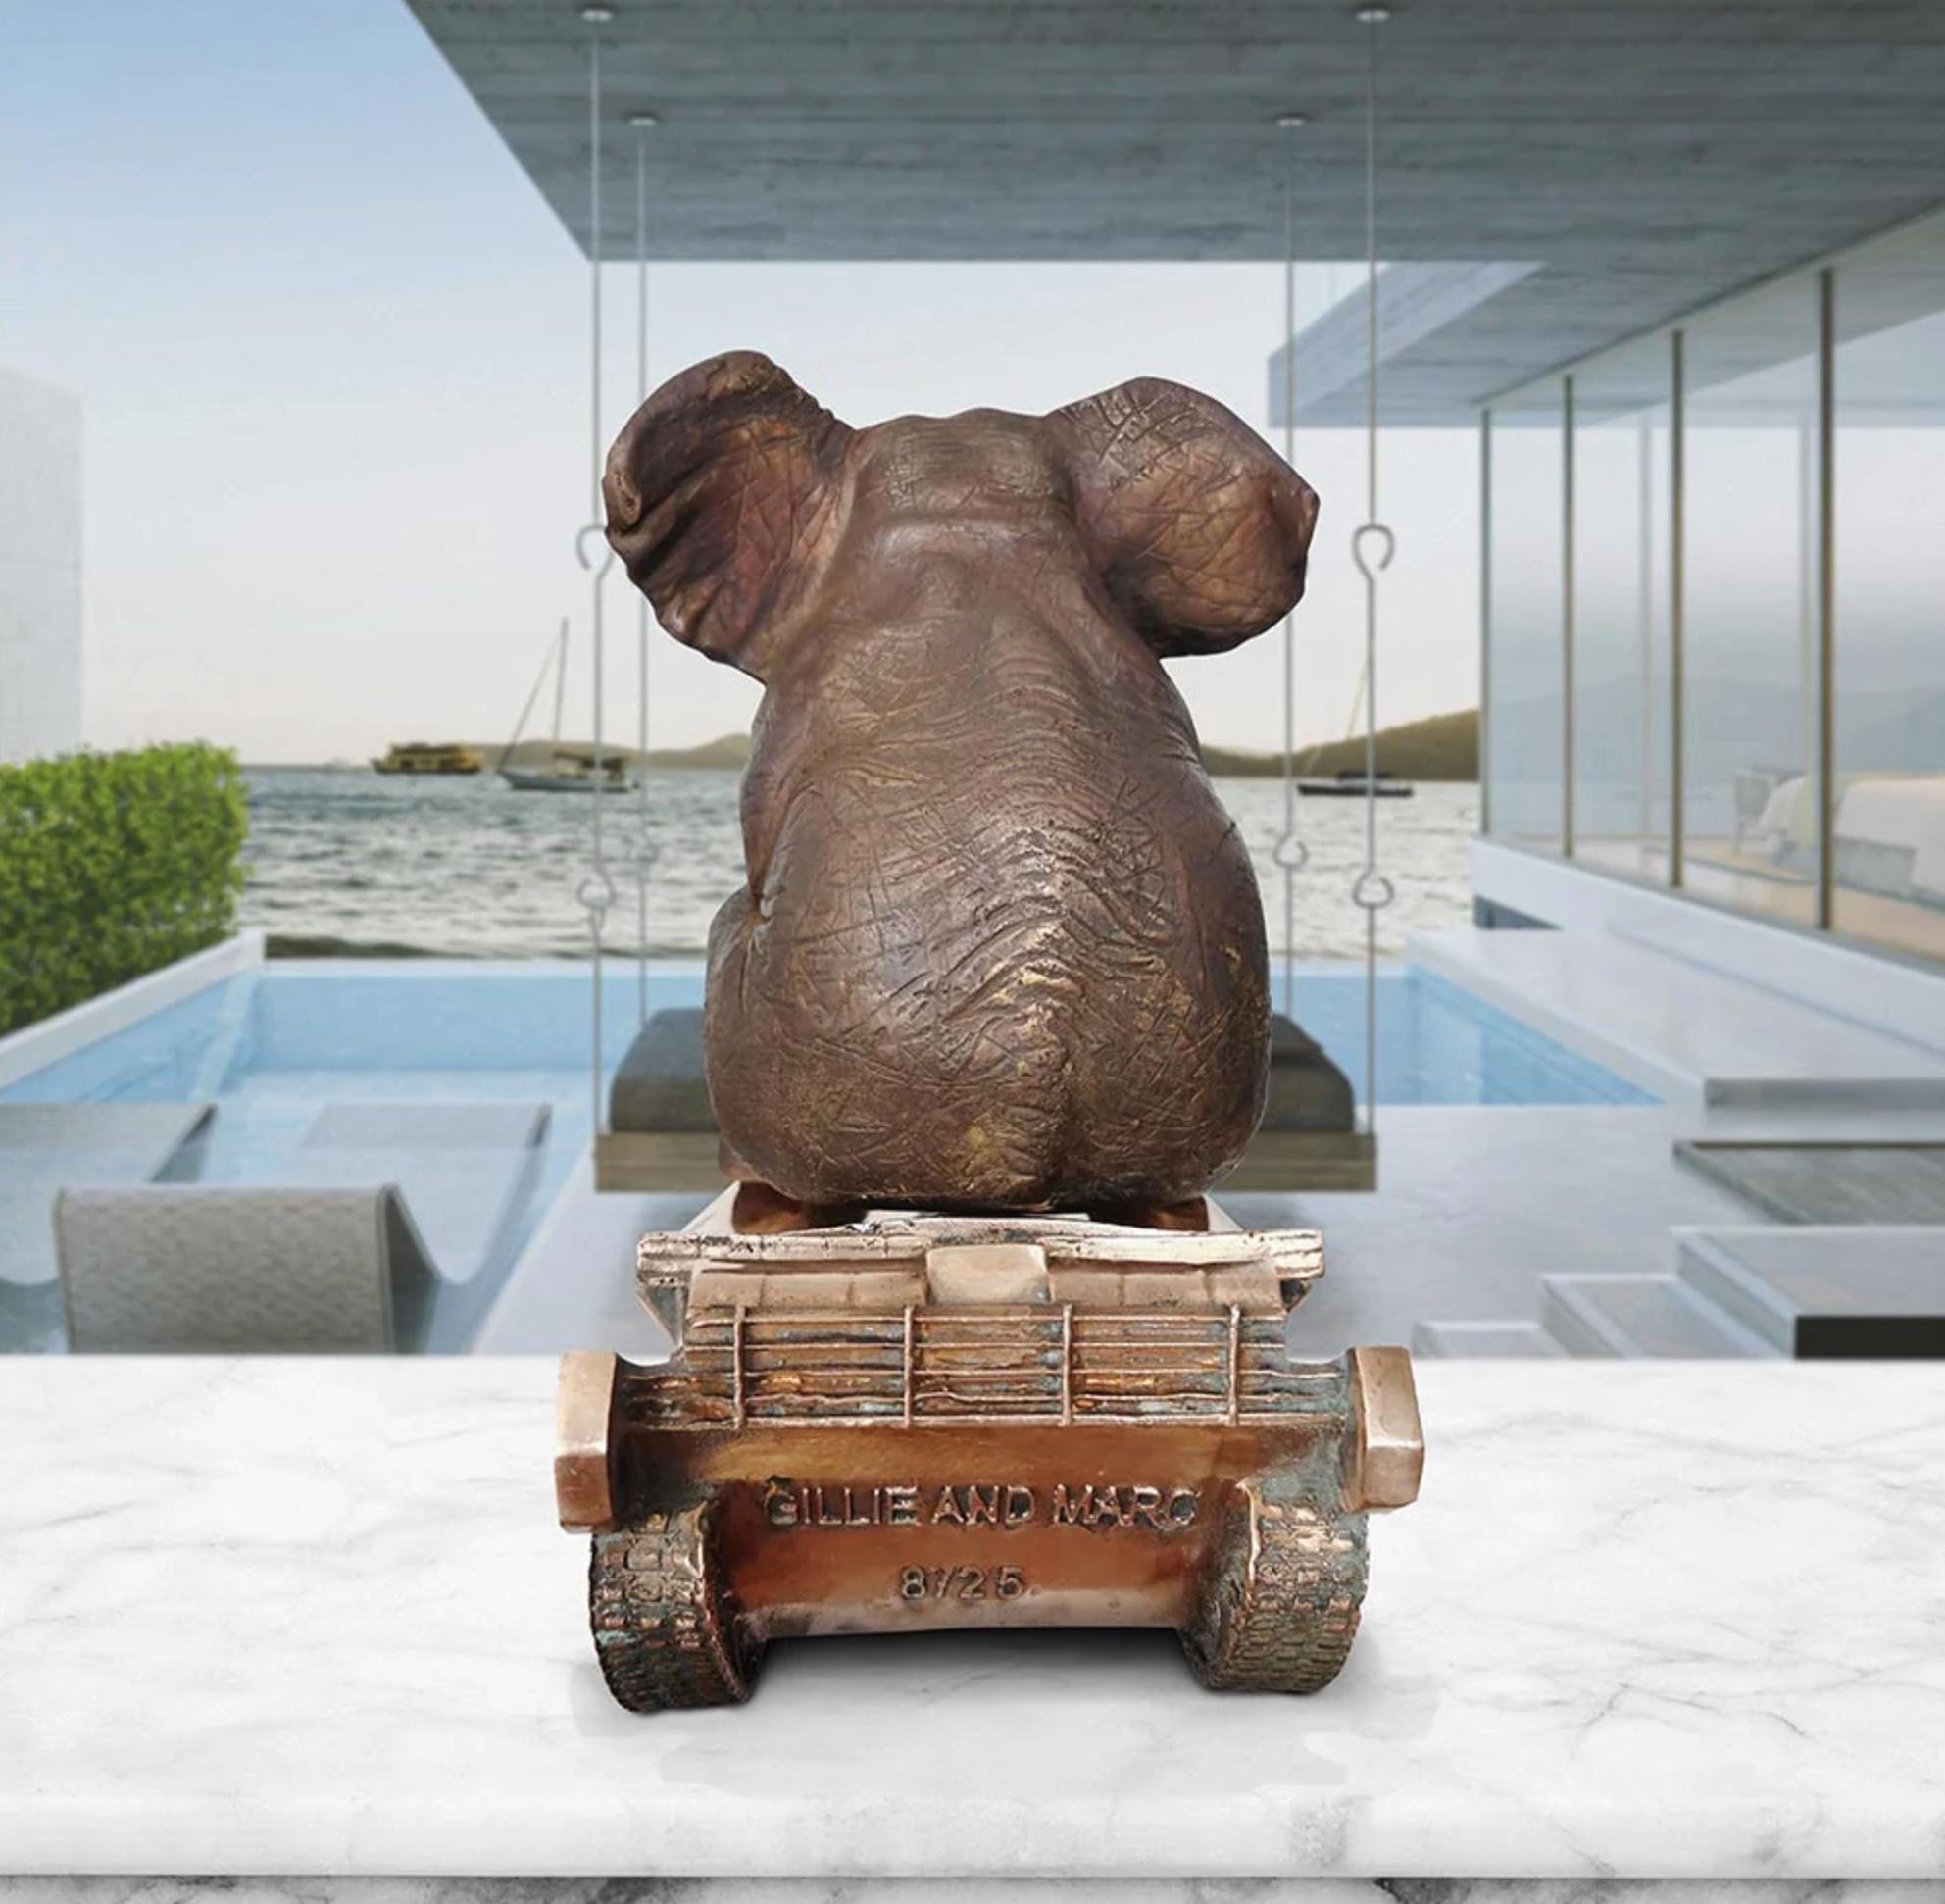 Title: The elephant has a crush on tanks
Authentic bronze sculpture

This authentic bronze sculpture titled 'The elephant has a crush on tanks' by artists Gillie and Marc has been meticulously crafted in bronze. It features an elephant sitting on a